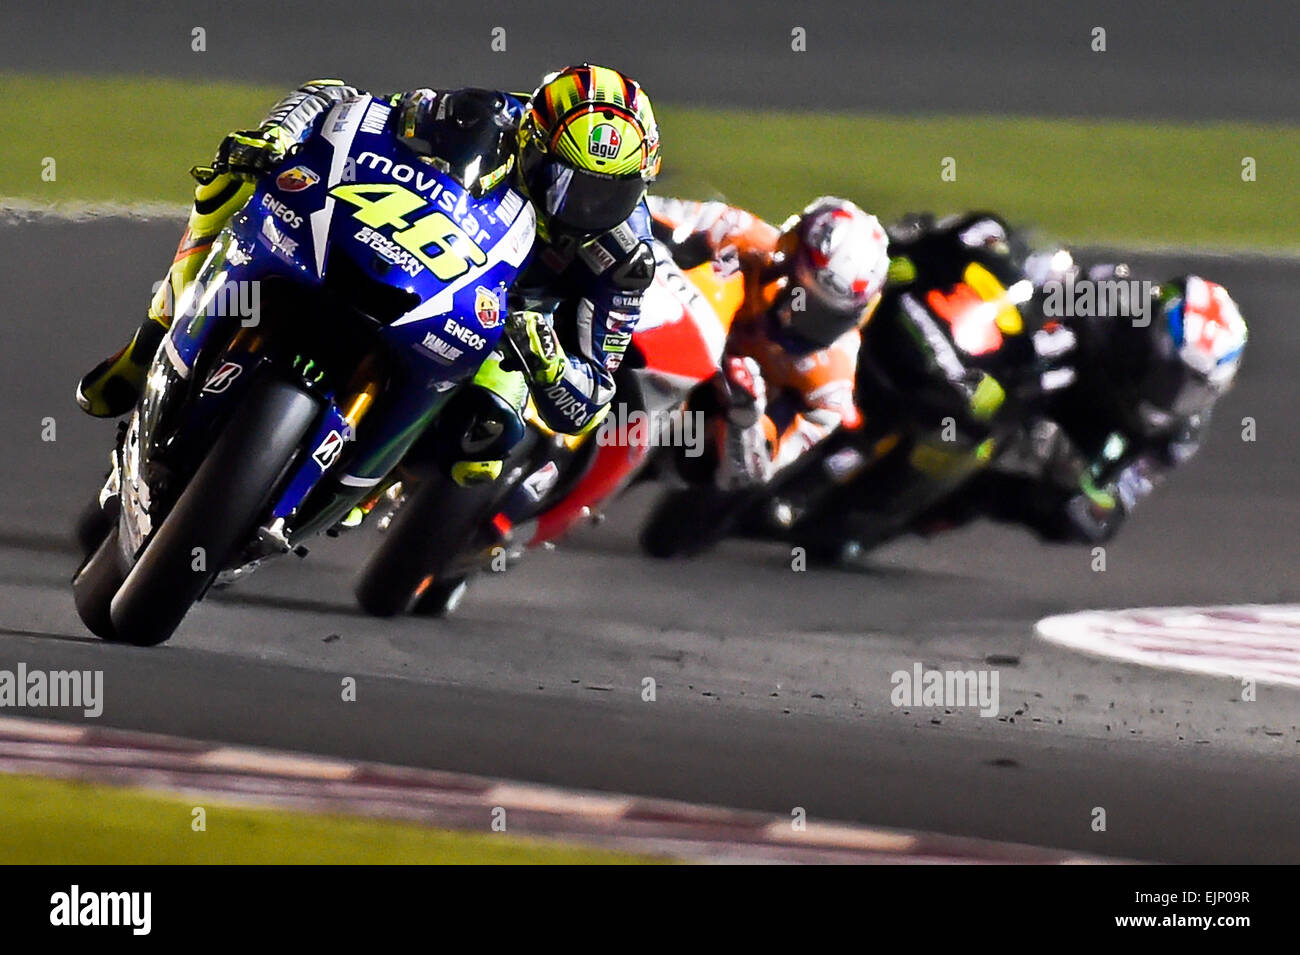 Losail, Doha, Qatar. 29th March, 2015. Valentino Rossi (Movistar Yamaha) in actions at Commercial Bank grand prix of Qatar Credit:  Gaetano Piazzolla/Alamy Live News Stock Photo